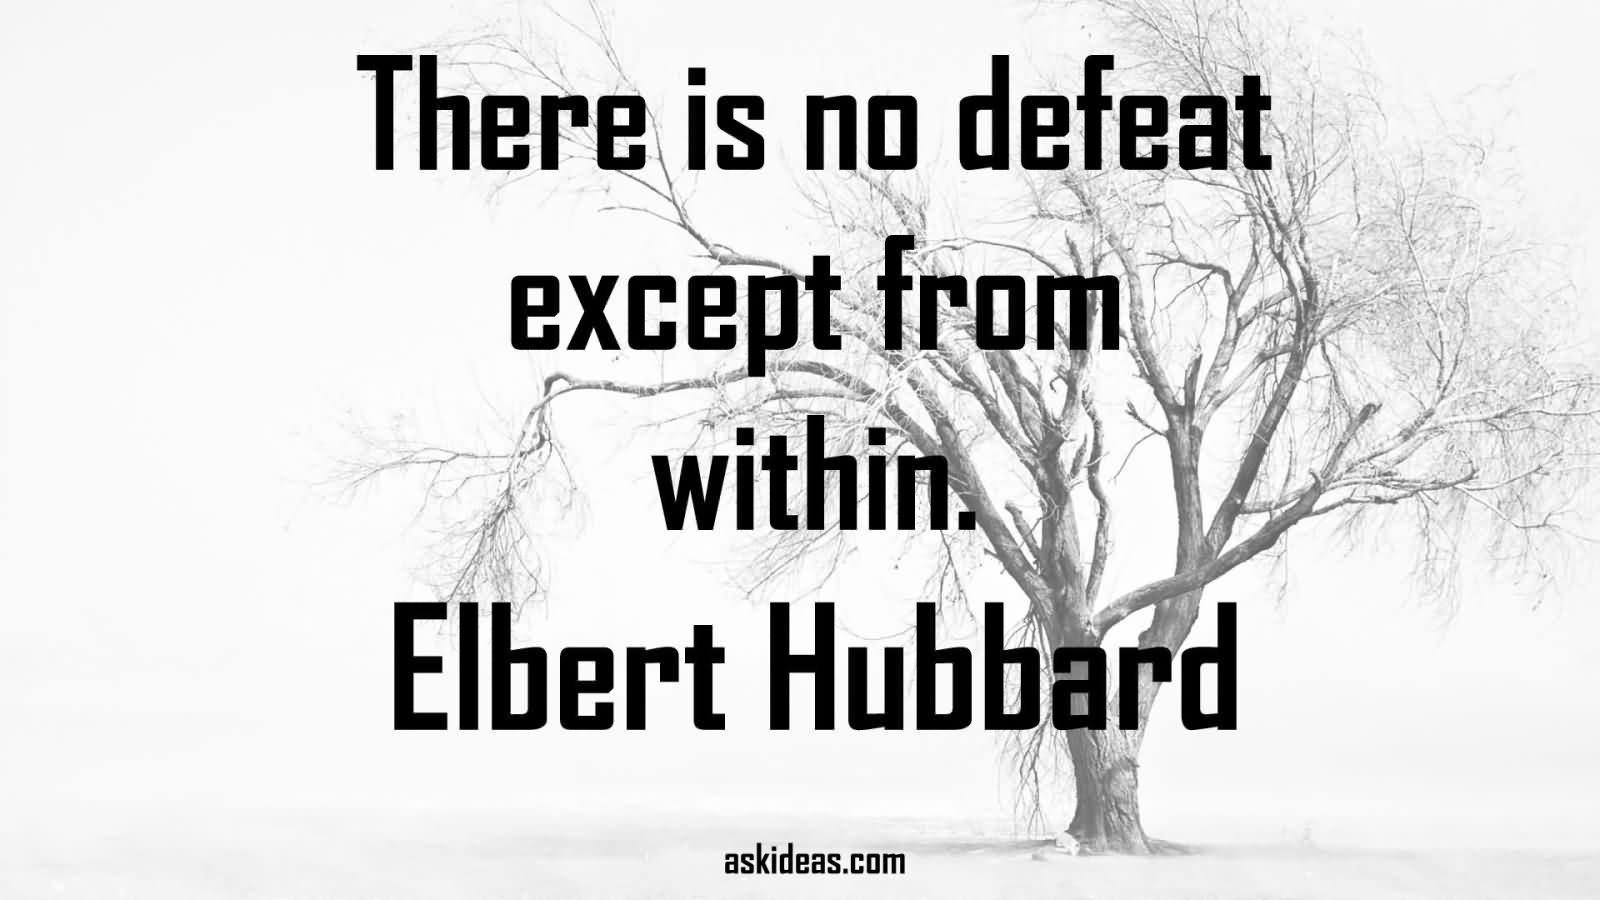 There is no defeat except from within.